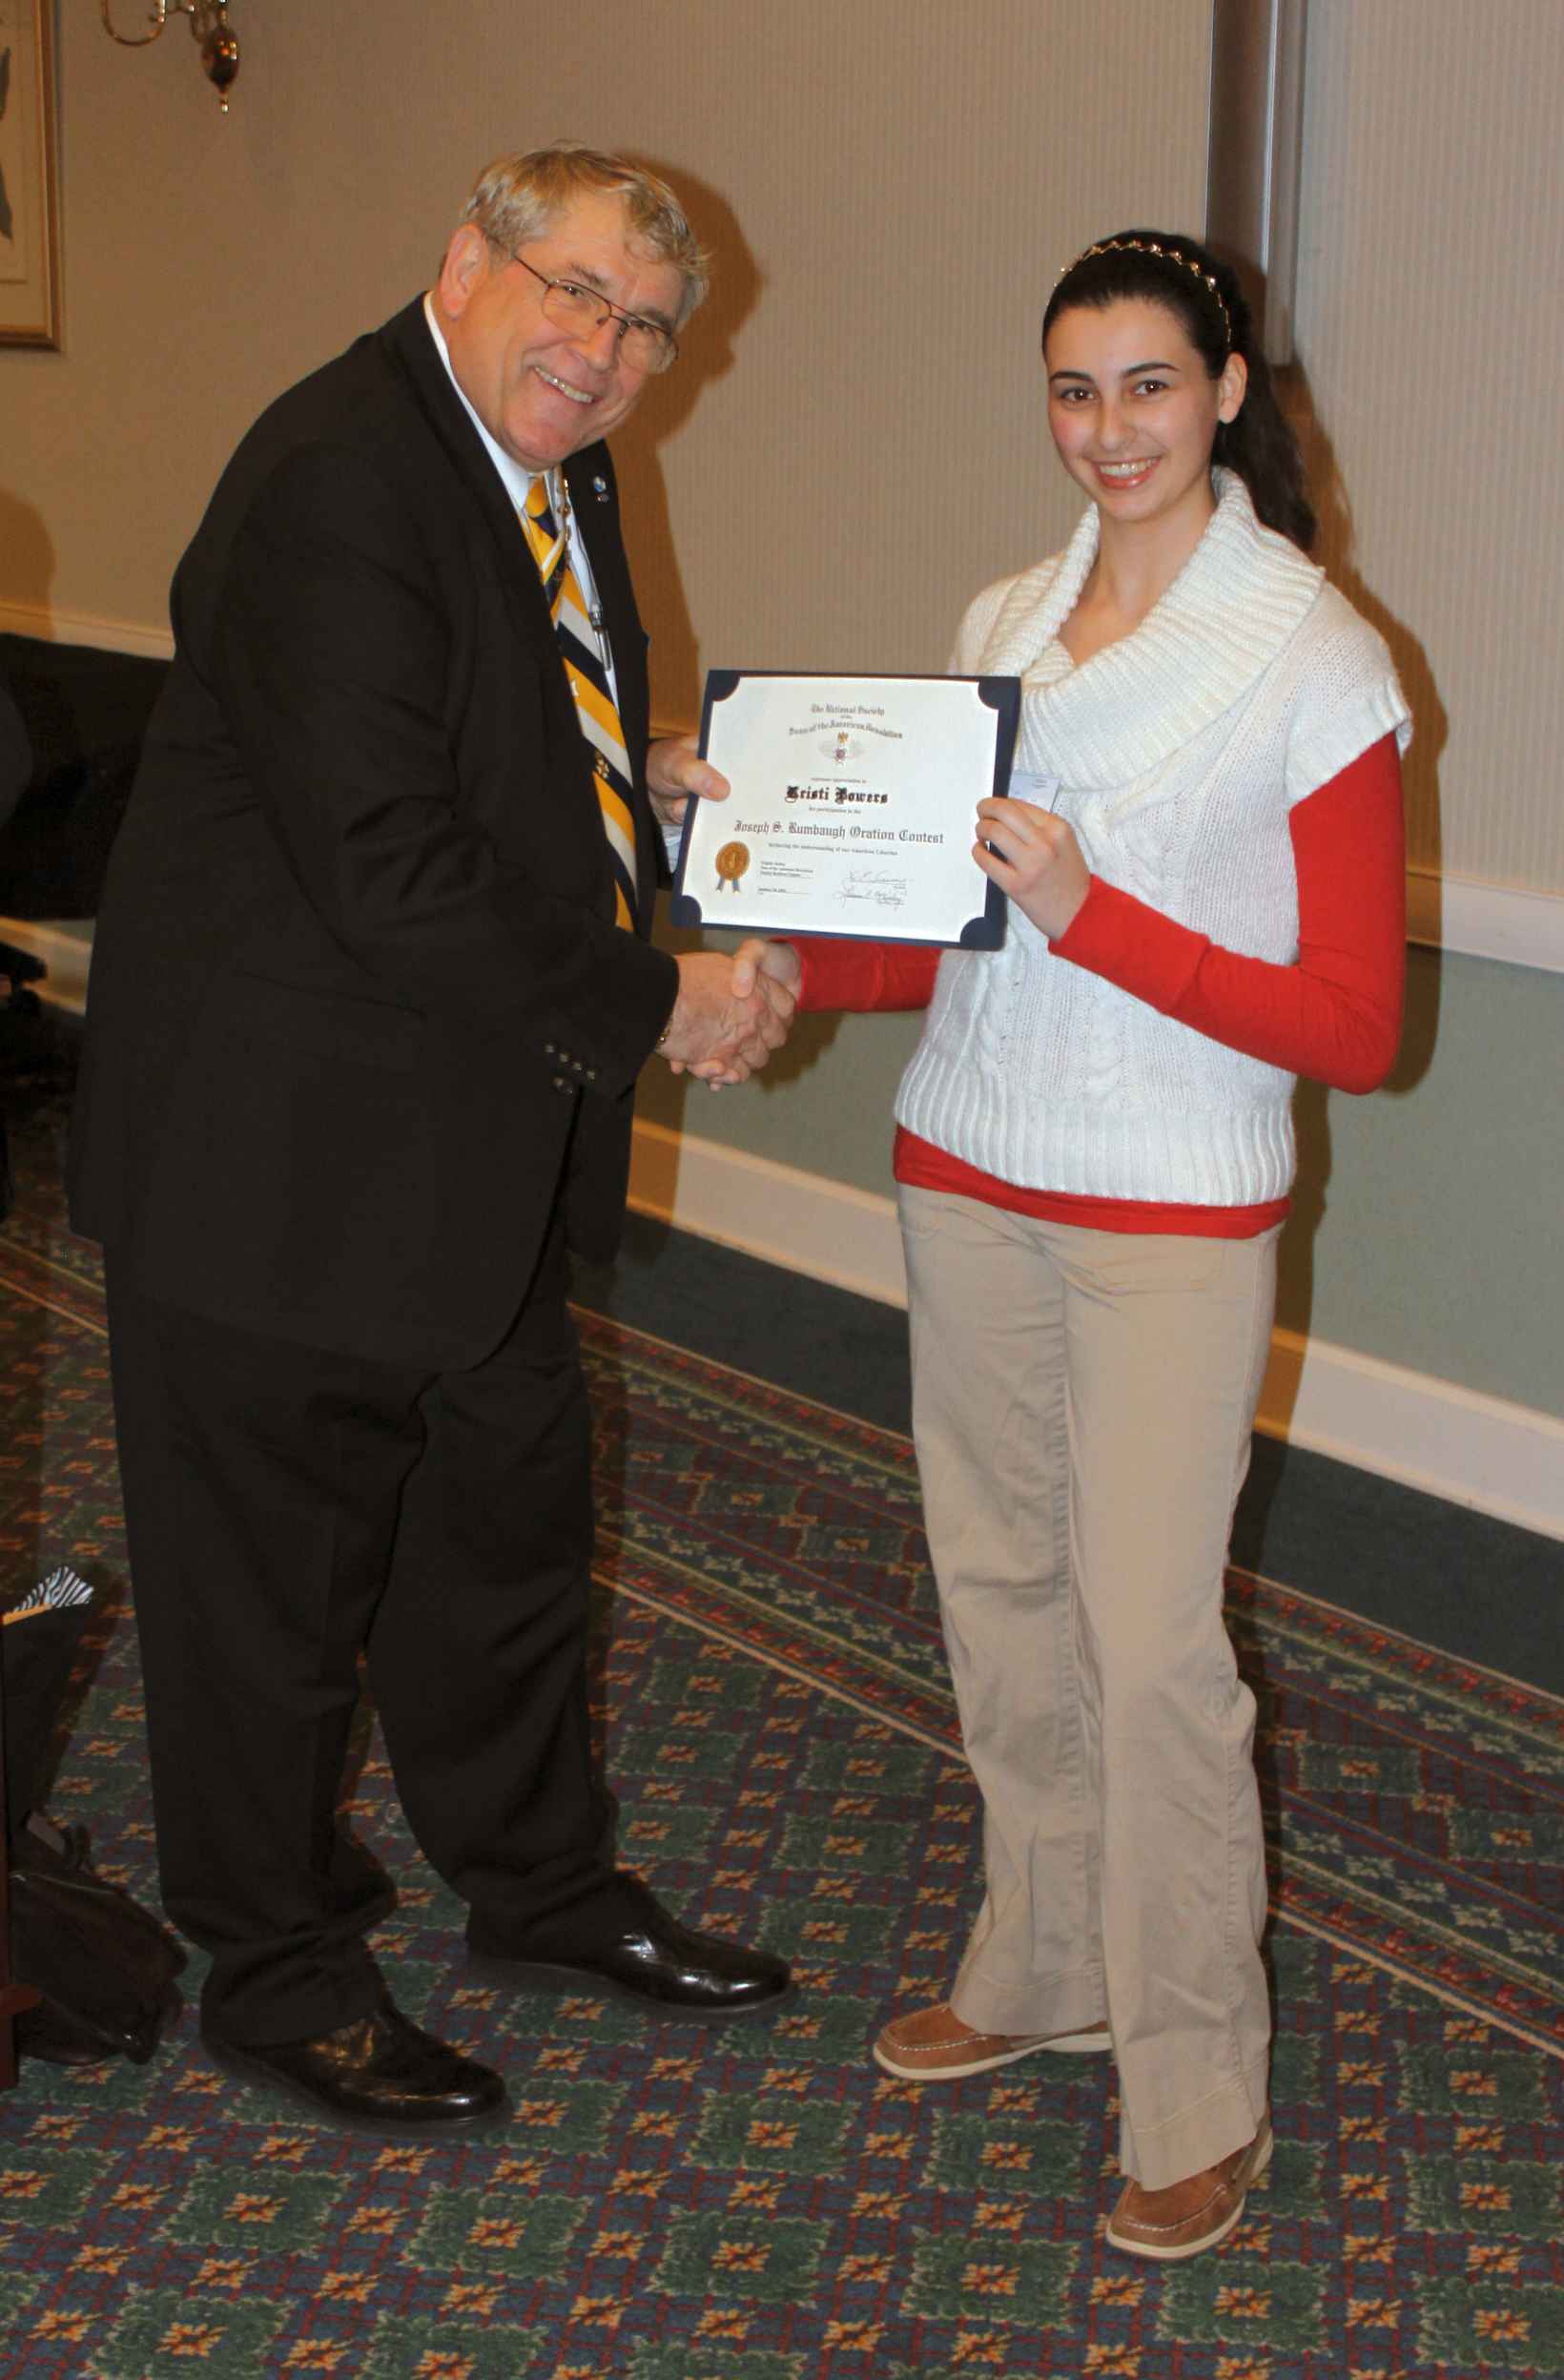 President Jack Sweeney presents the winner of the chapter oration contest, Kristi Bowers, with a check and certificate.